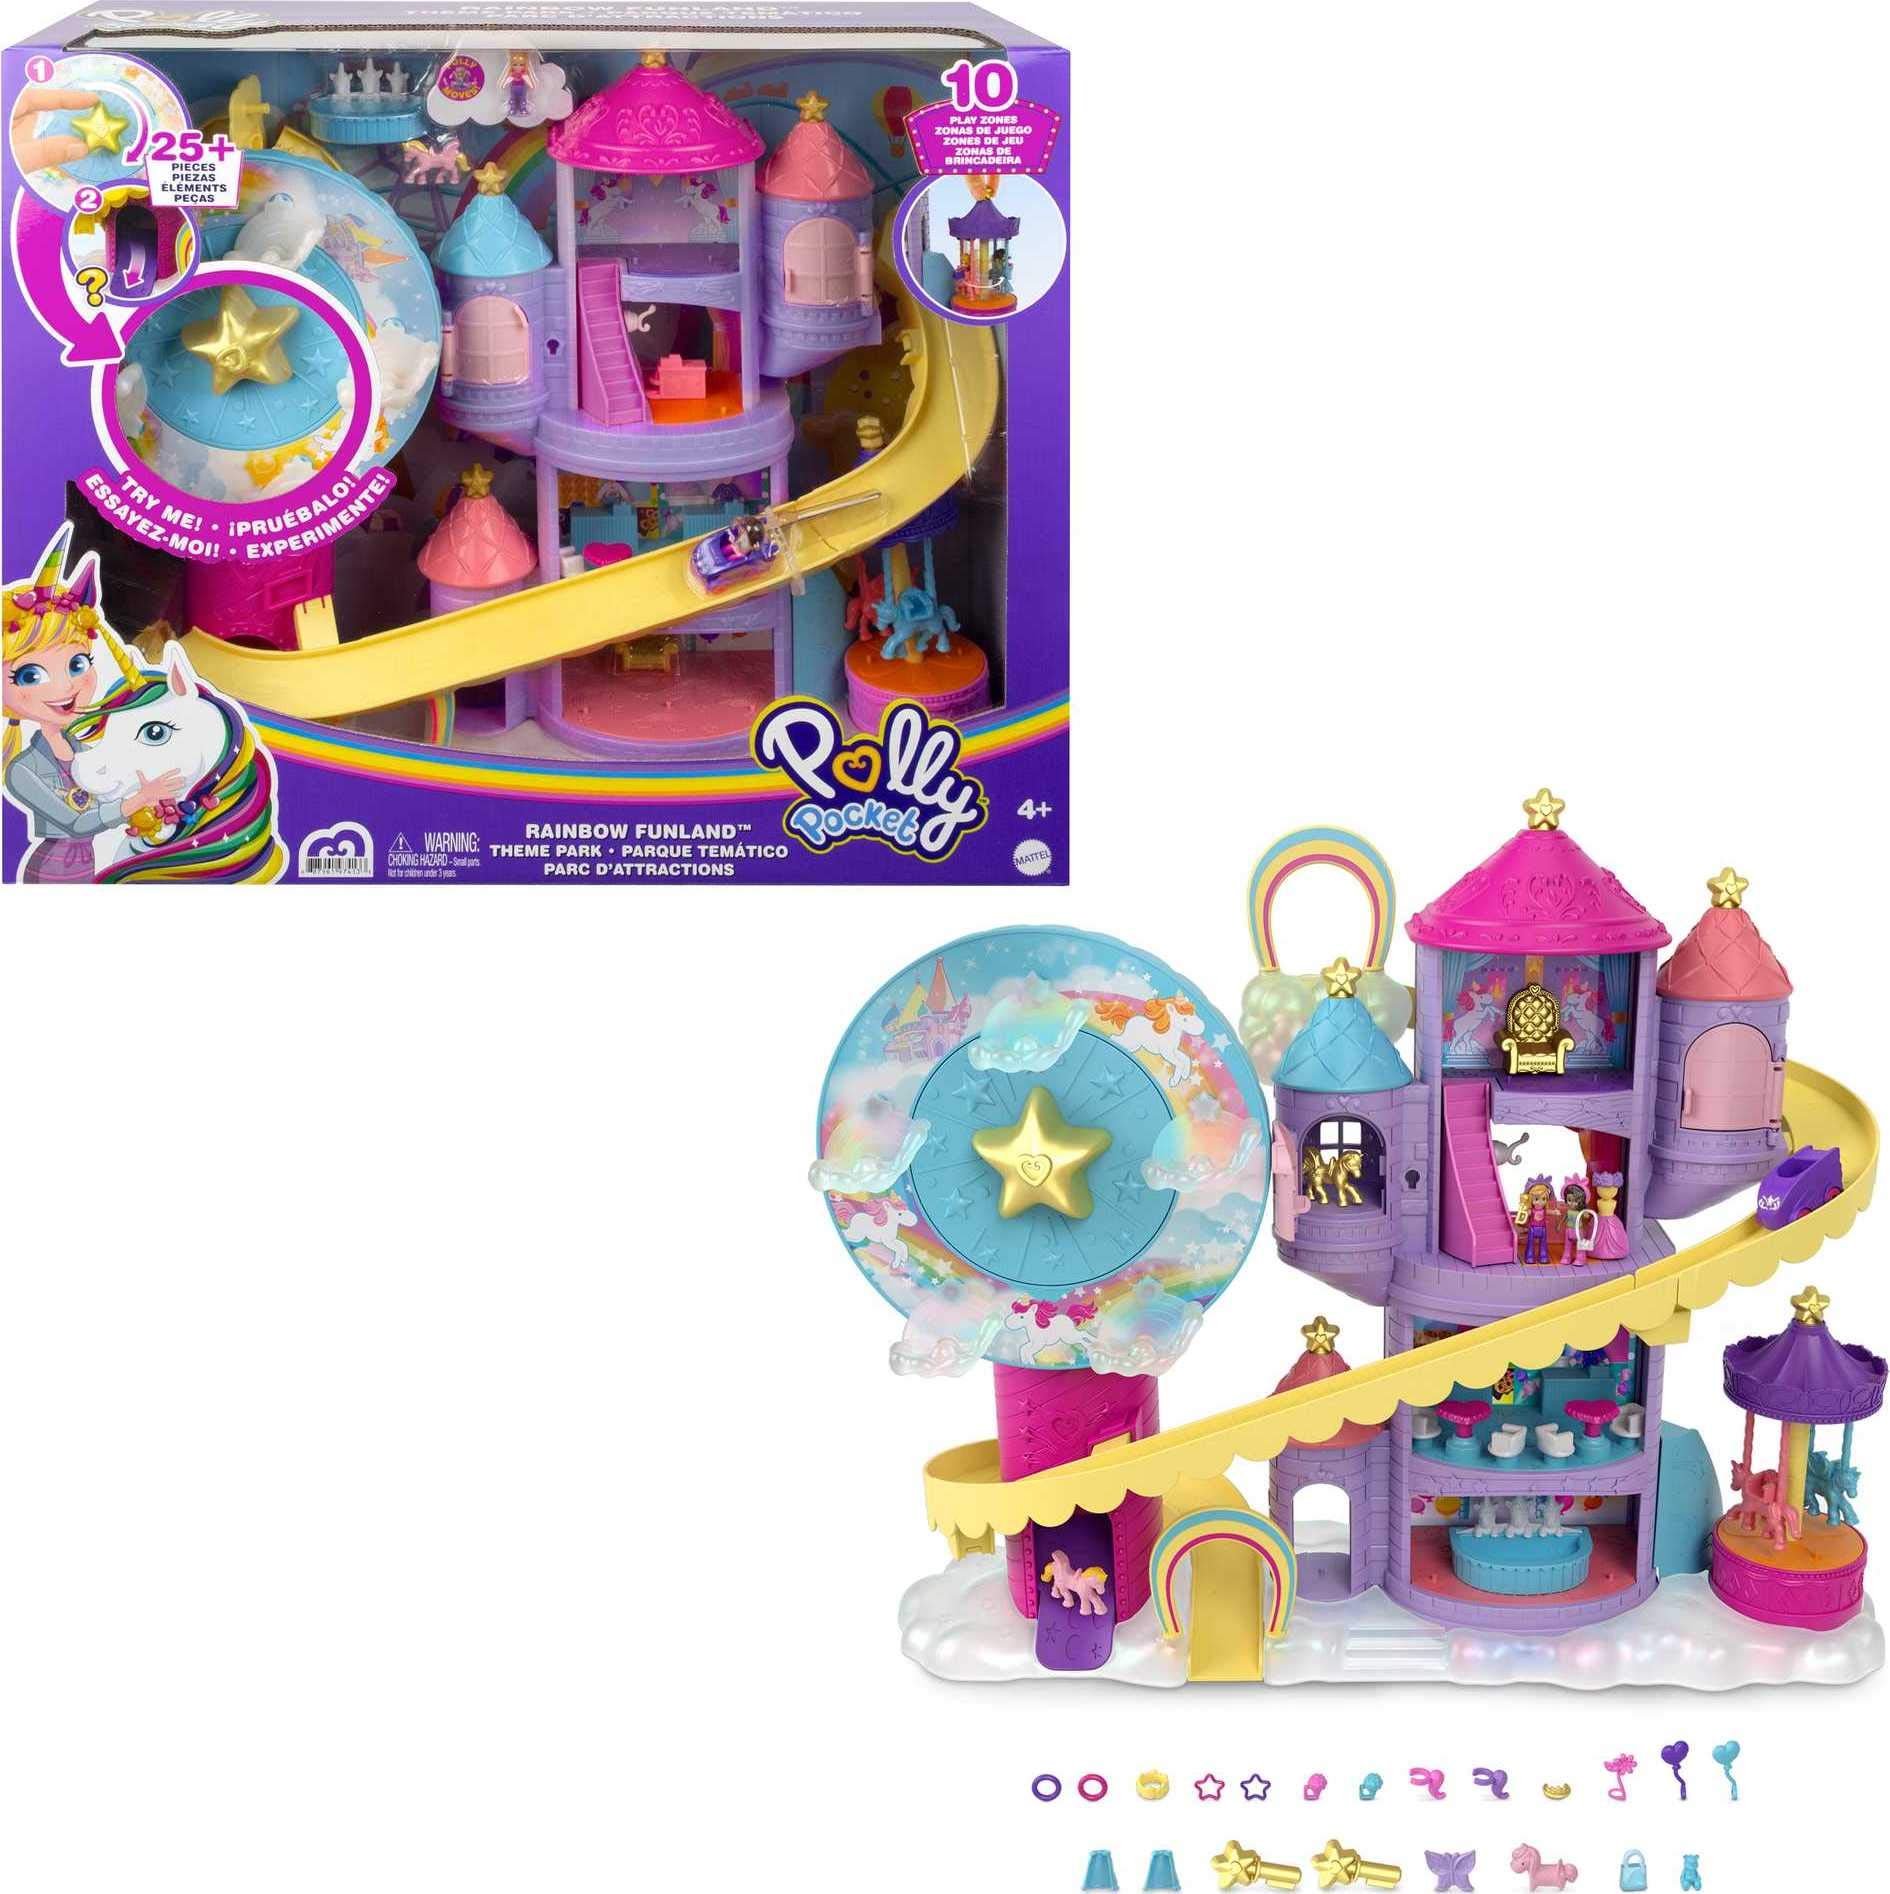 Polly Pocket Rainbow Funland Theme Park, 3 Rides, 7 Play Areas, Polly and Shani Dolls, 2 Unicorns & 25 Surprise Accessories (30 Total Play Pieces), Great Gift for Ages 4 Years Old & Up